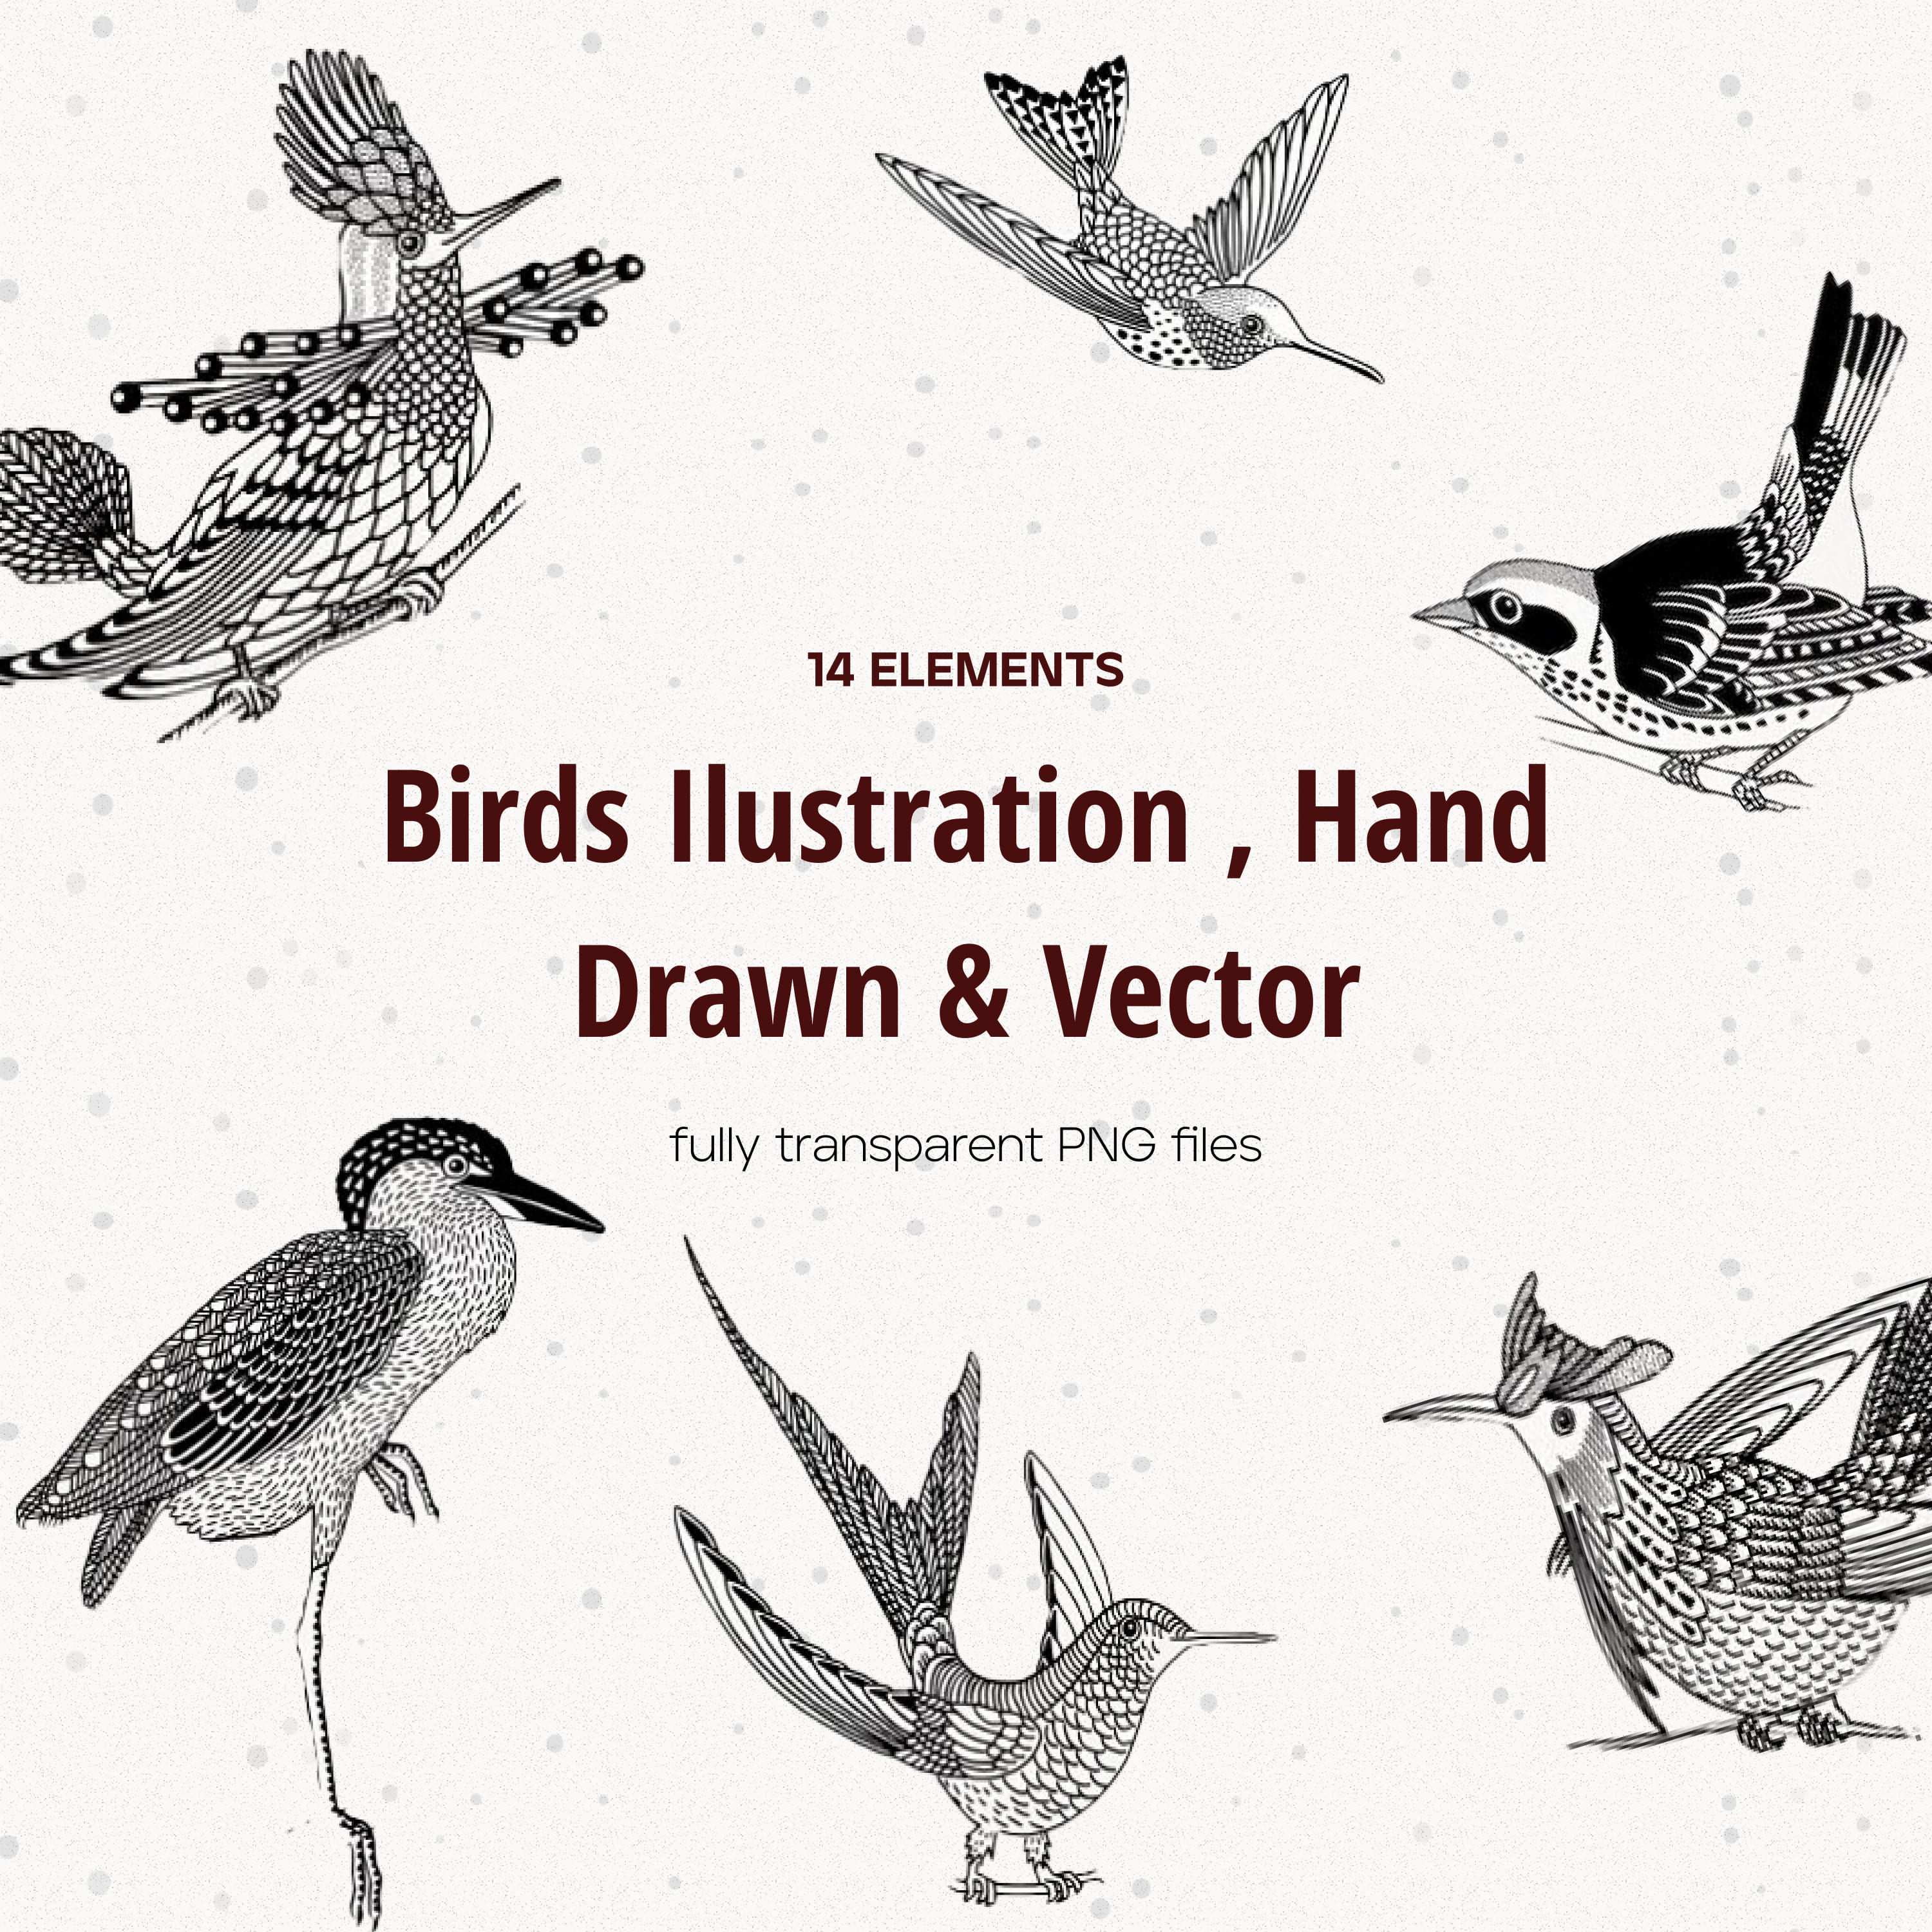 Hand drawn illustrations of birds - main image preview.